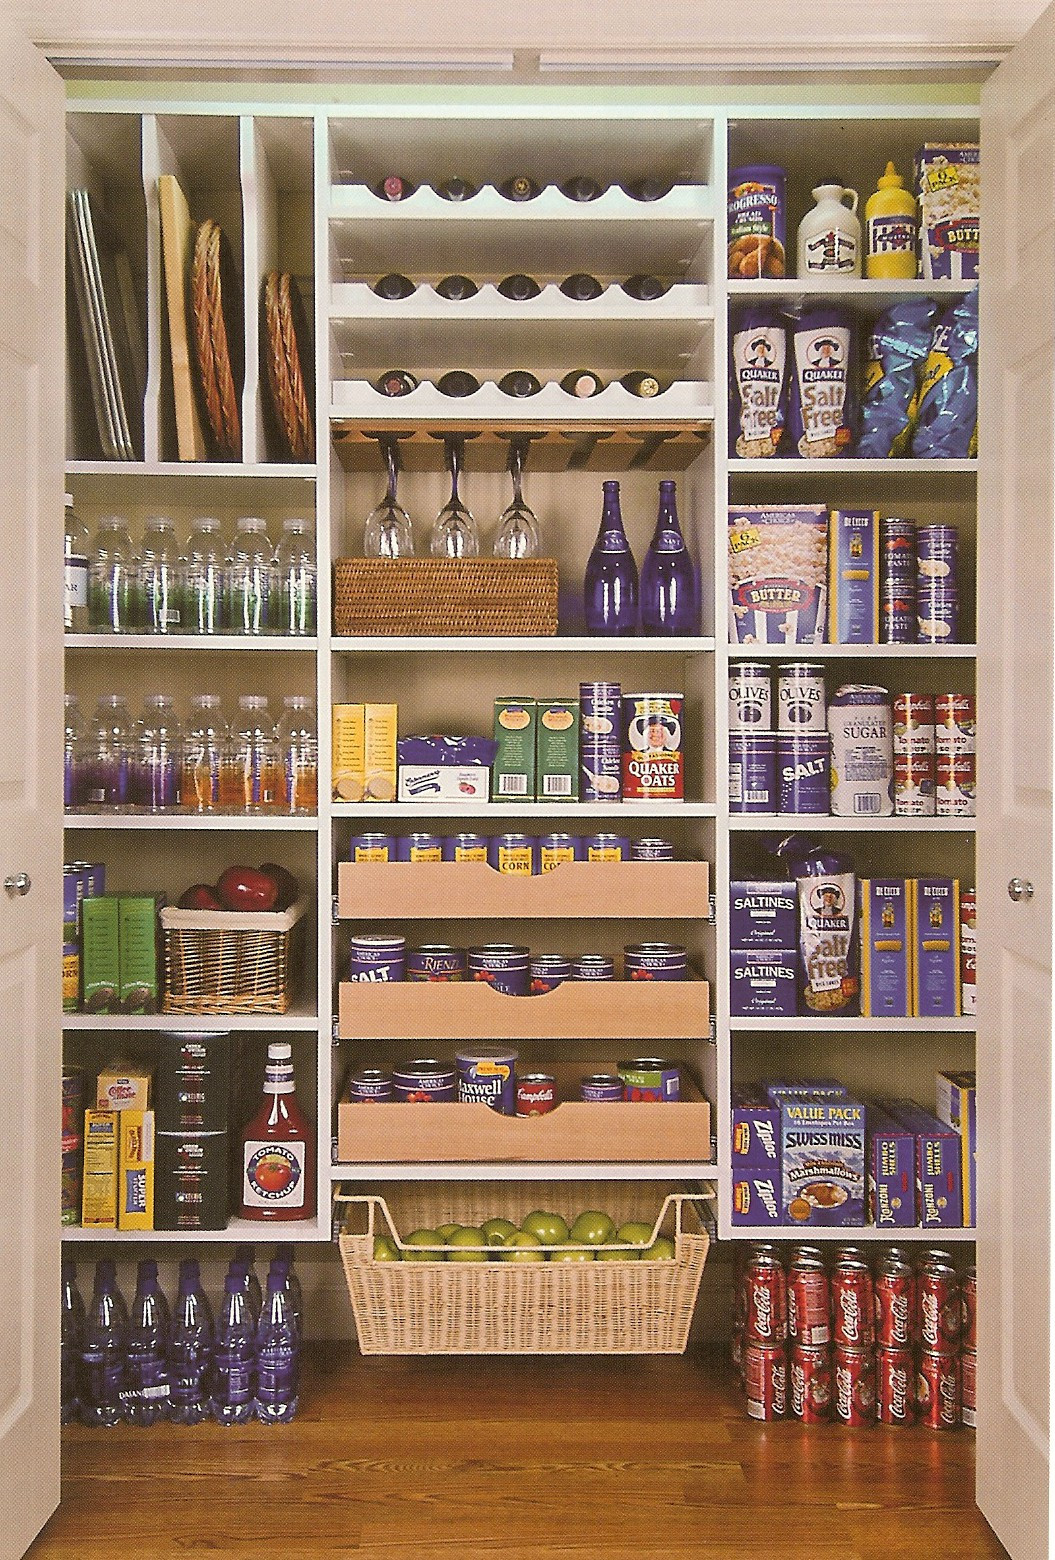 Kitchen Closet Organizers
 The Laundry Room…Potential pantry